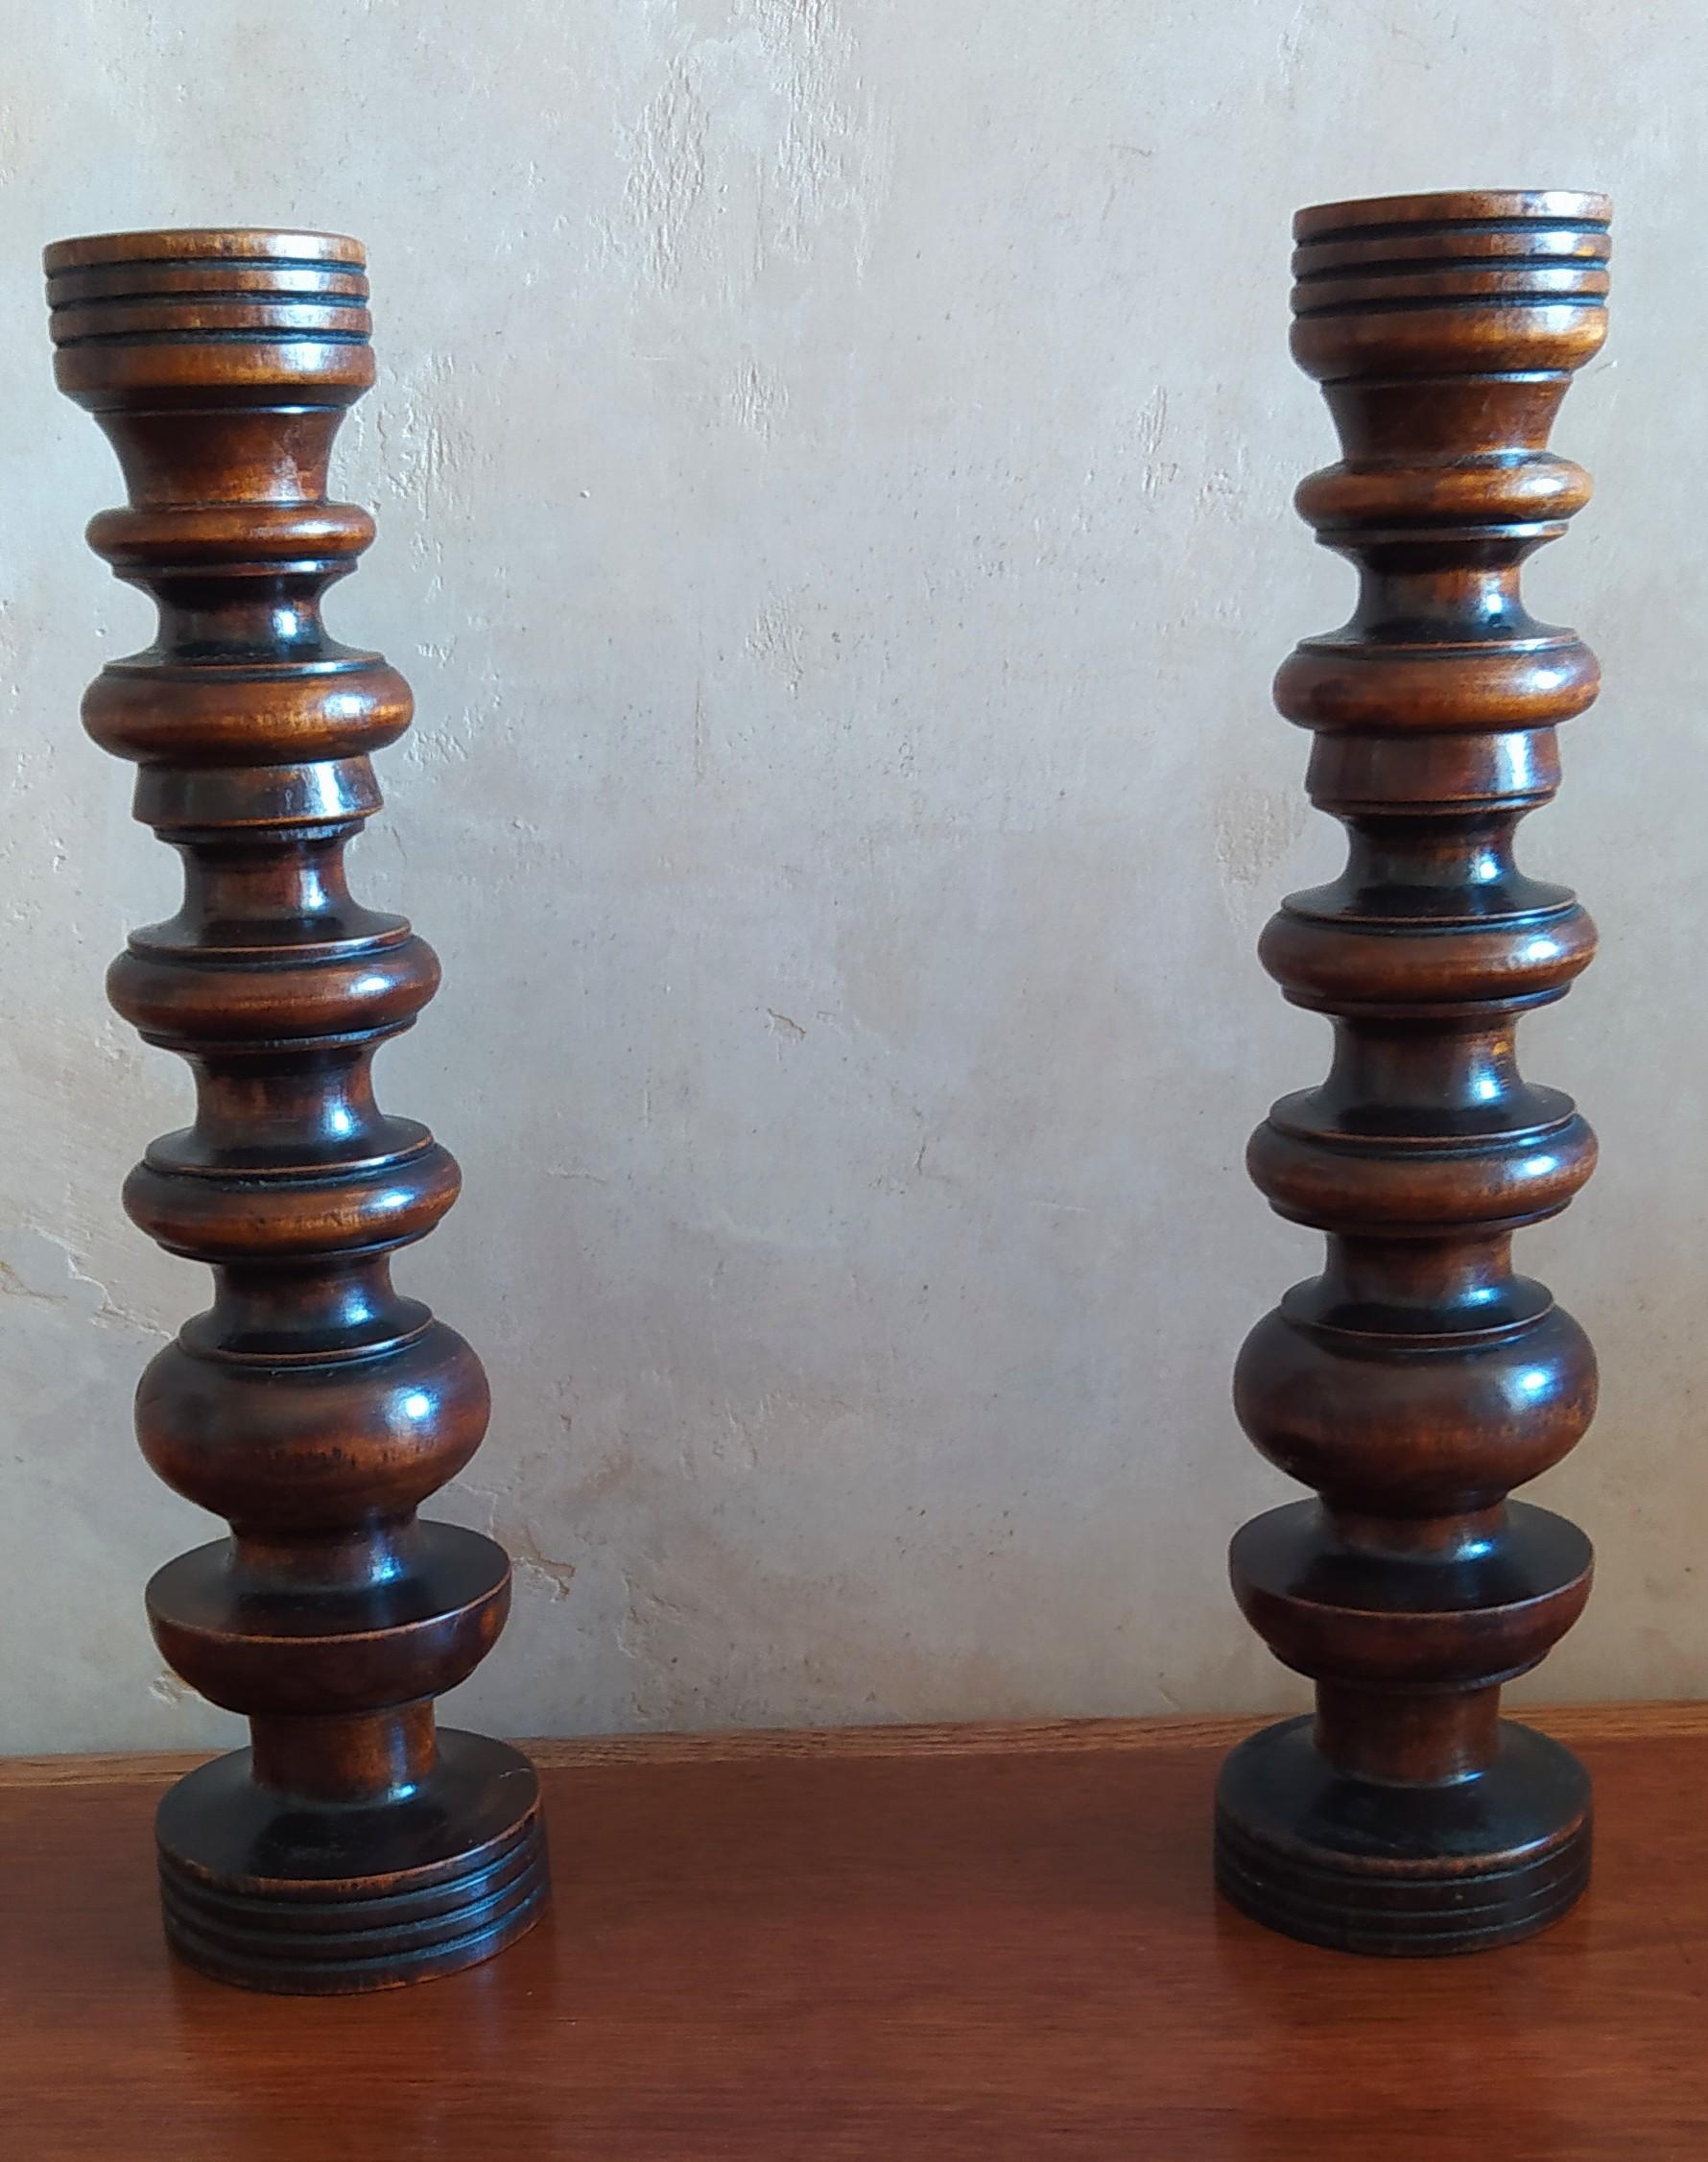 Pair of Early C20th French Turned Walnut Candlesticks In Good Condition For Sale In Matlock, GB